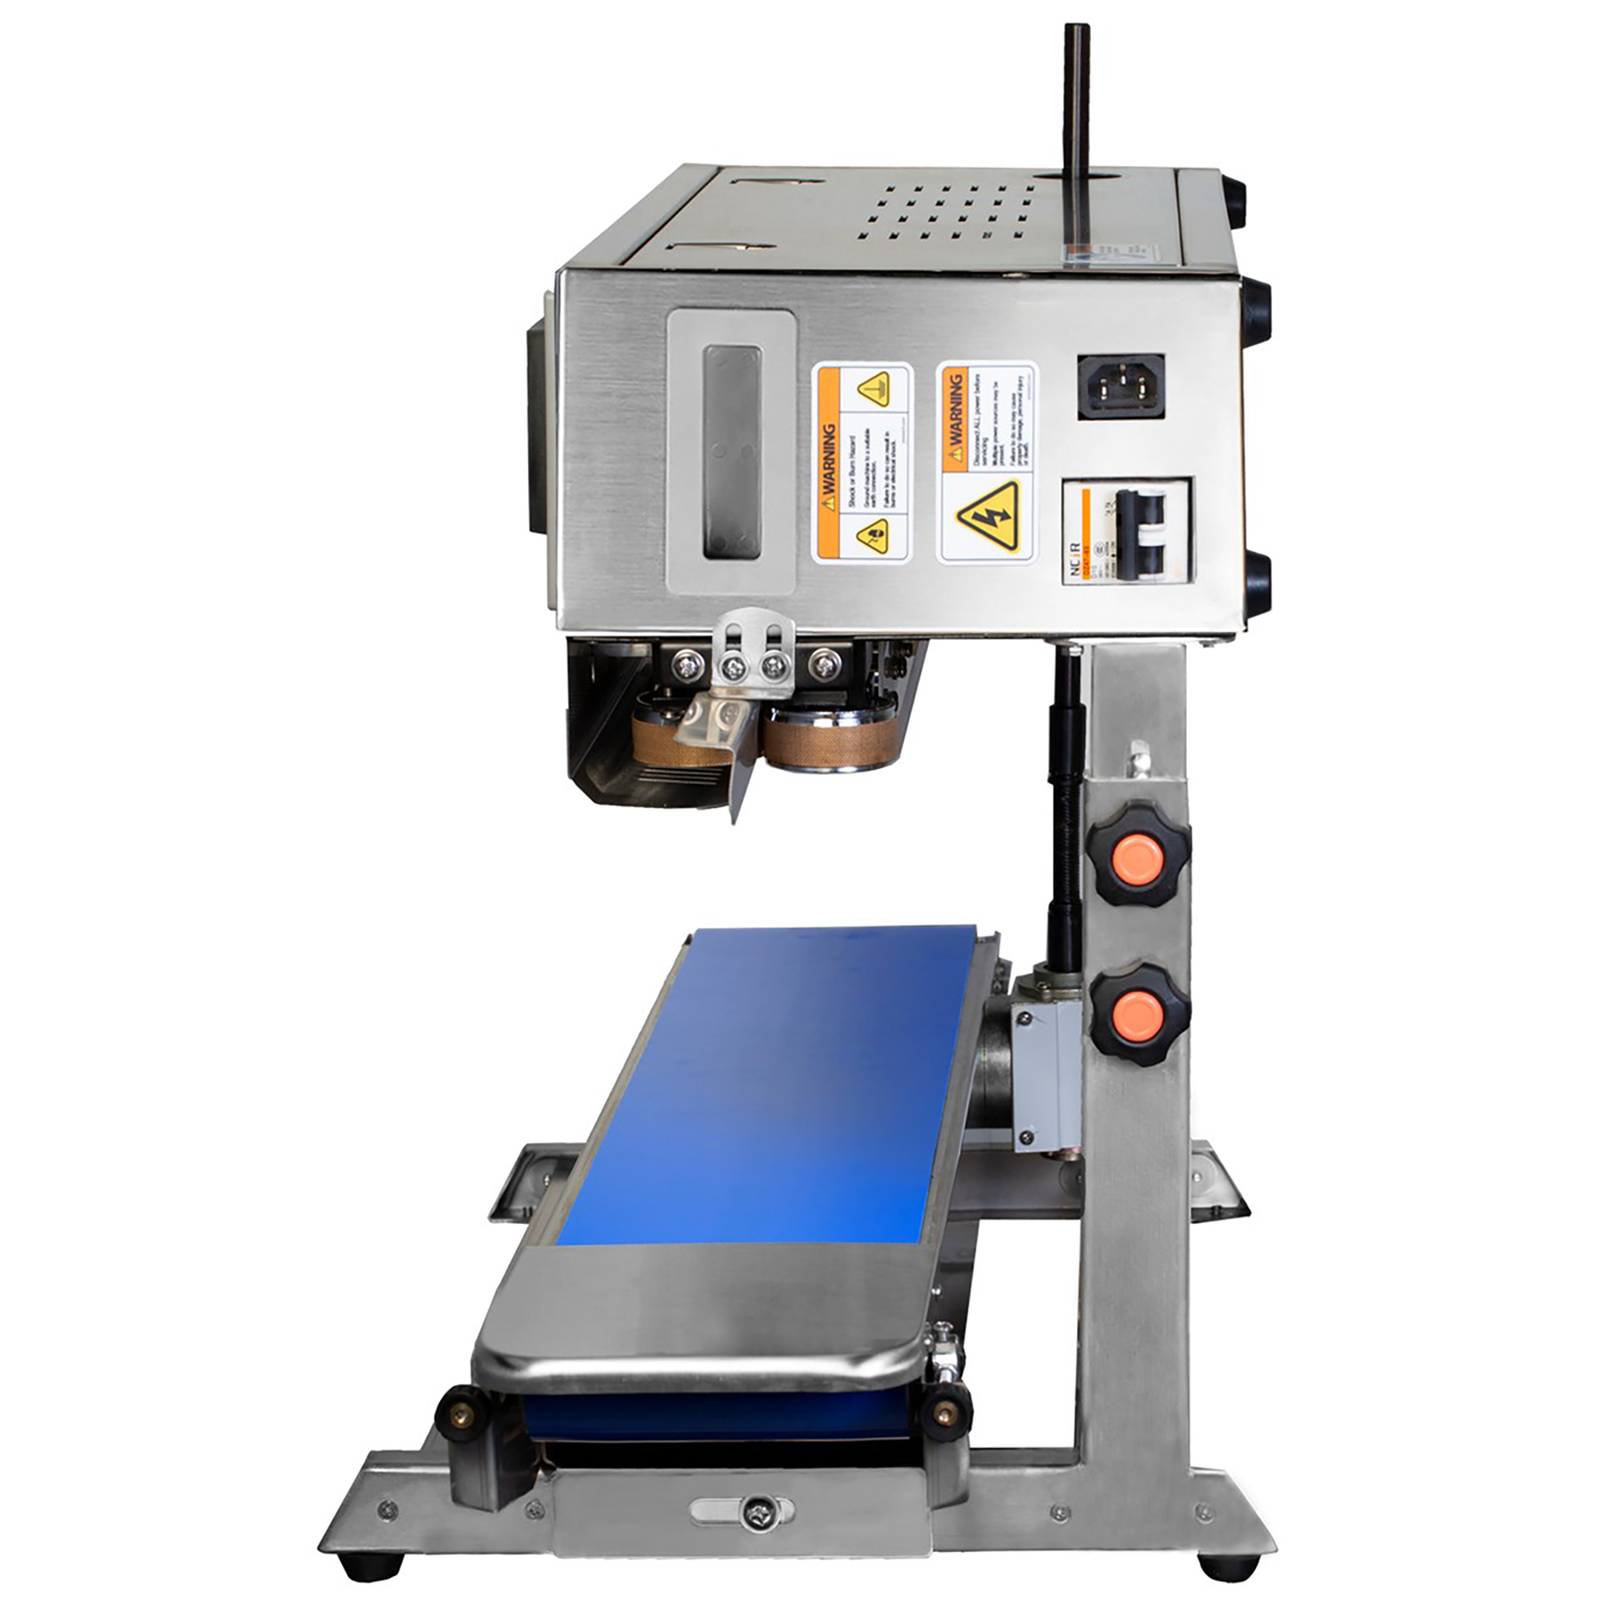 Side view of the JORESTECH Stainless steel continuous bag sealing machine with blue revolving band set for vertical applications over white background